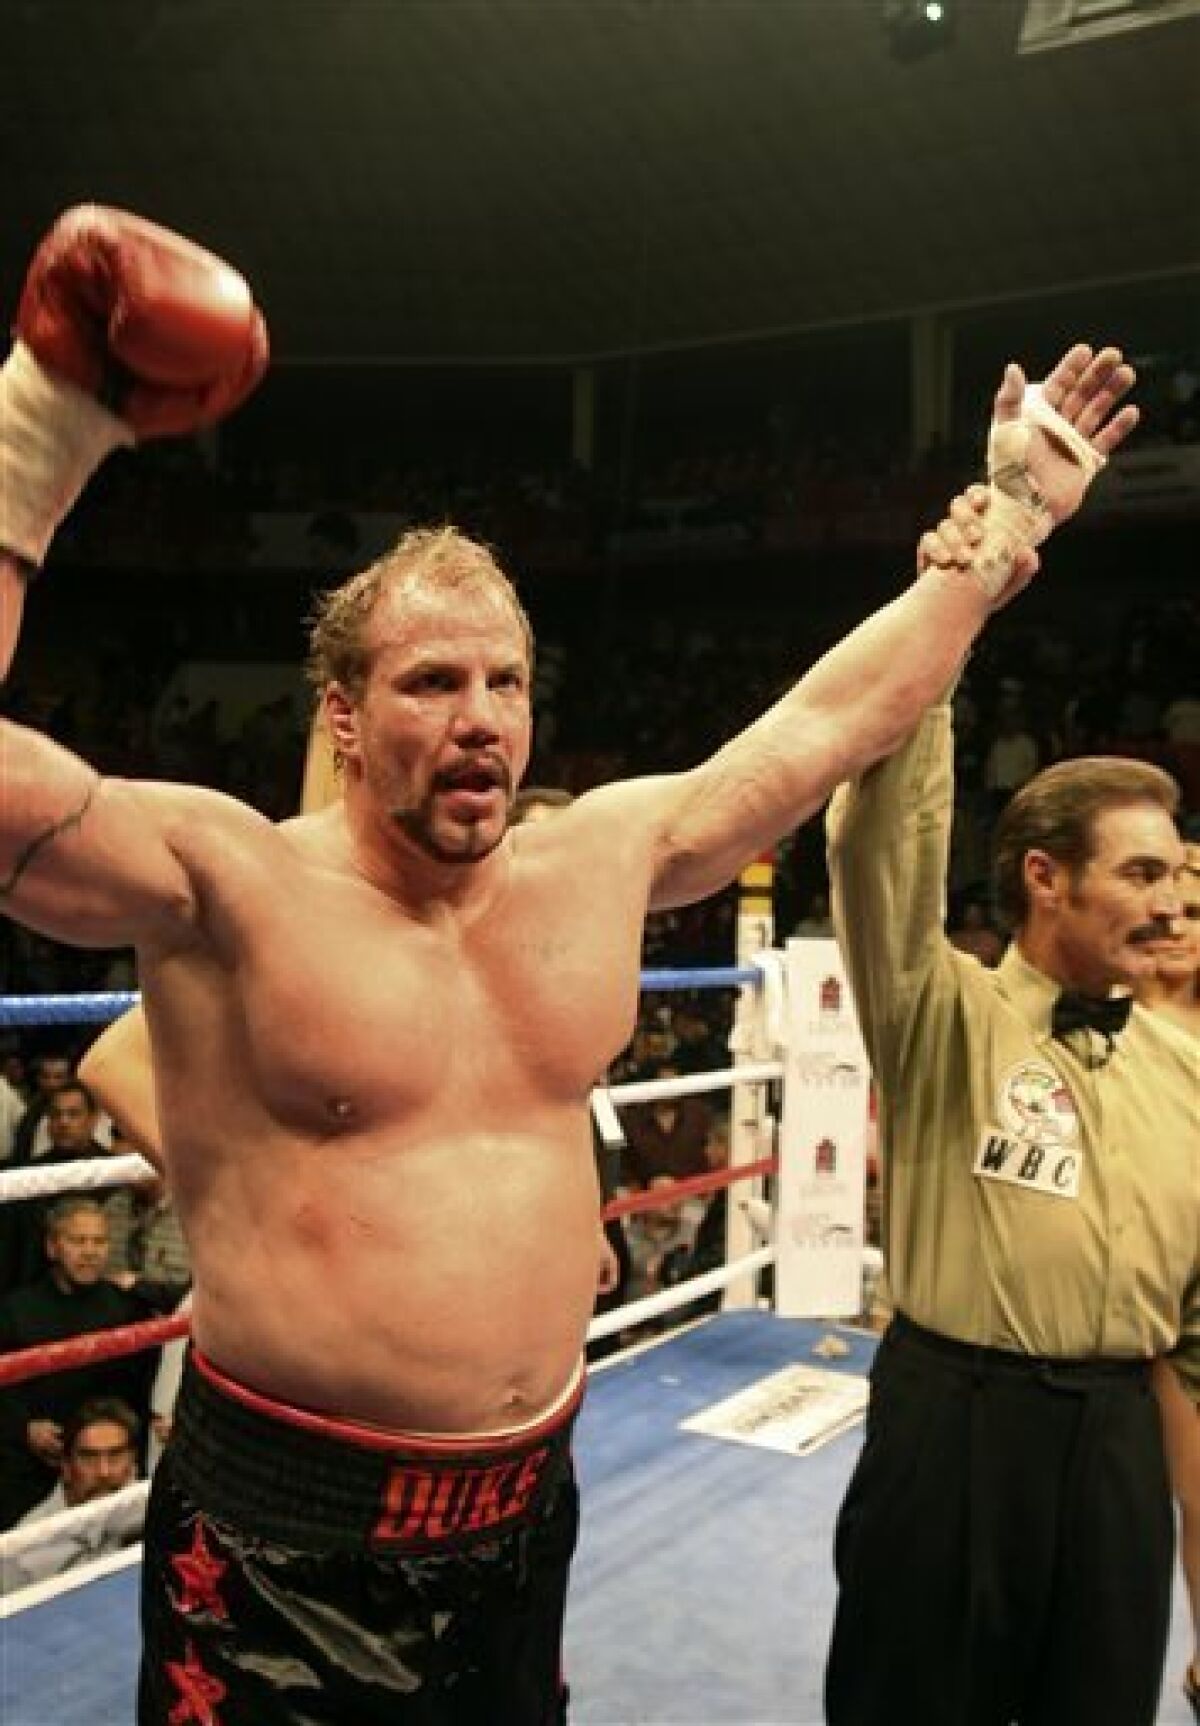 FILEm- In this Feb. 9, 2008 file photo, former world heavyweight champion Tommy Morrison, celebates after defeating Matt Weishaar in Leon, Mexico. Morrison, who gained fame for his role in the movie "Rocky V," has died. He was 44. Morrison's former manager, Tony Holden says his longtime friend died Sunday night, Sept. 1, 2013, at a Nebraska hospital. (AP Photo/Mario Armas)